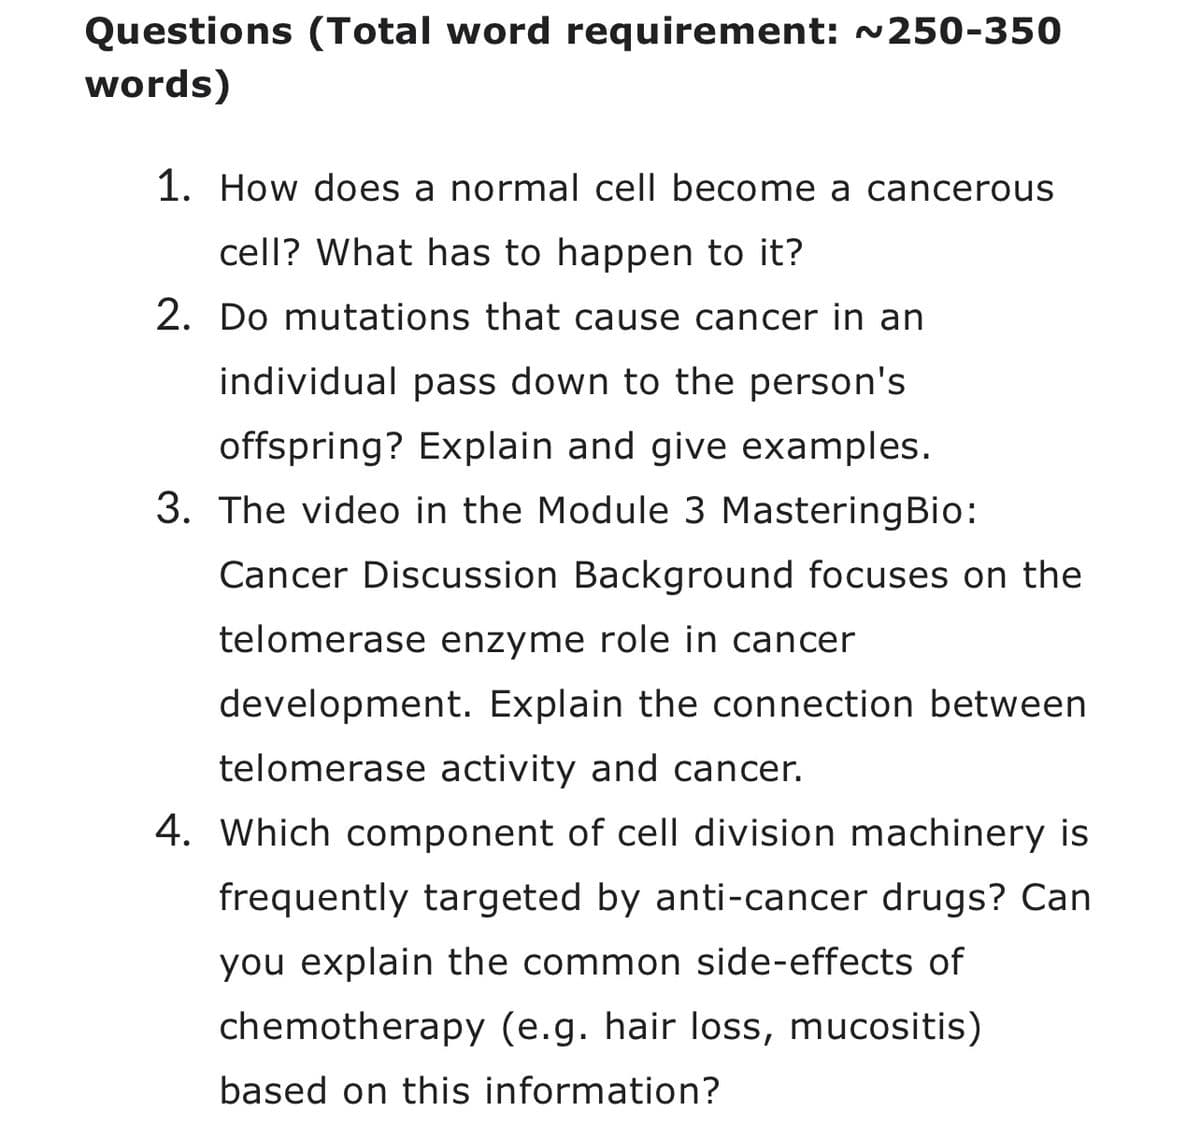 Questions (Total word requirement: ~250-350
words)
1. How does a normal cell become a cancerous
cell? What has to happen to it?
2. Do mutations that cause cancer in an
individual pass down to the person's
offspring? Explain and give examples.
3. The video in the Module 3 Mastering Bio:
Cancer Discussion Background focuses on the
telomerase enzyme role in cancer
development. Explain the connection between
telomerase activity and cancer.
4. Which component of cell division machinery is
frequently targeted by anti-cancer drugs? Can
you explain the common side-effects of
chemotherapy (e.g. hair loss, mucositis)
based on this information?